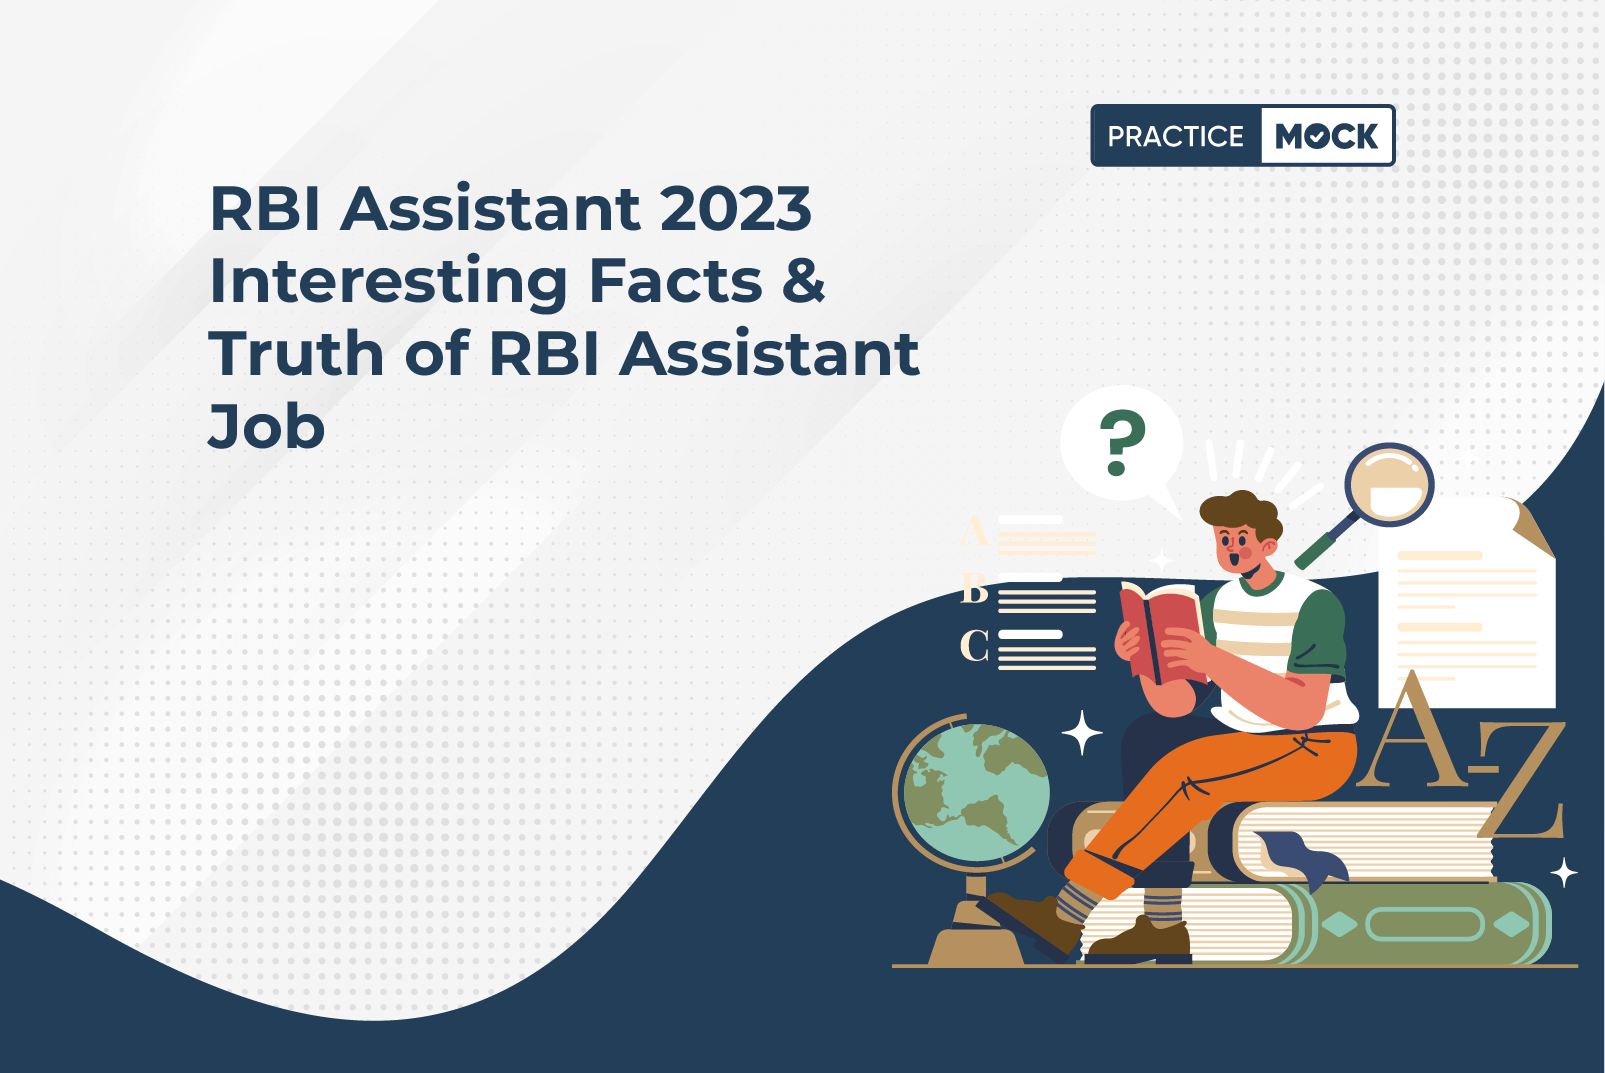 RBI Assistant 2023 Interesting Facts